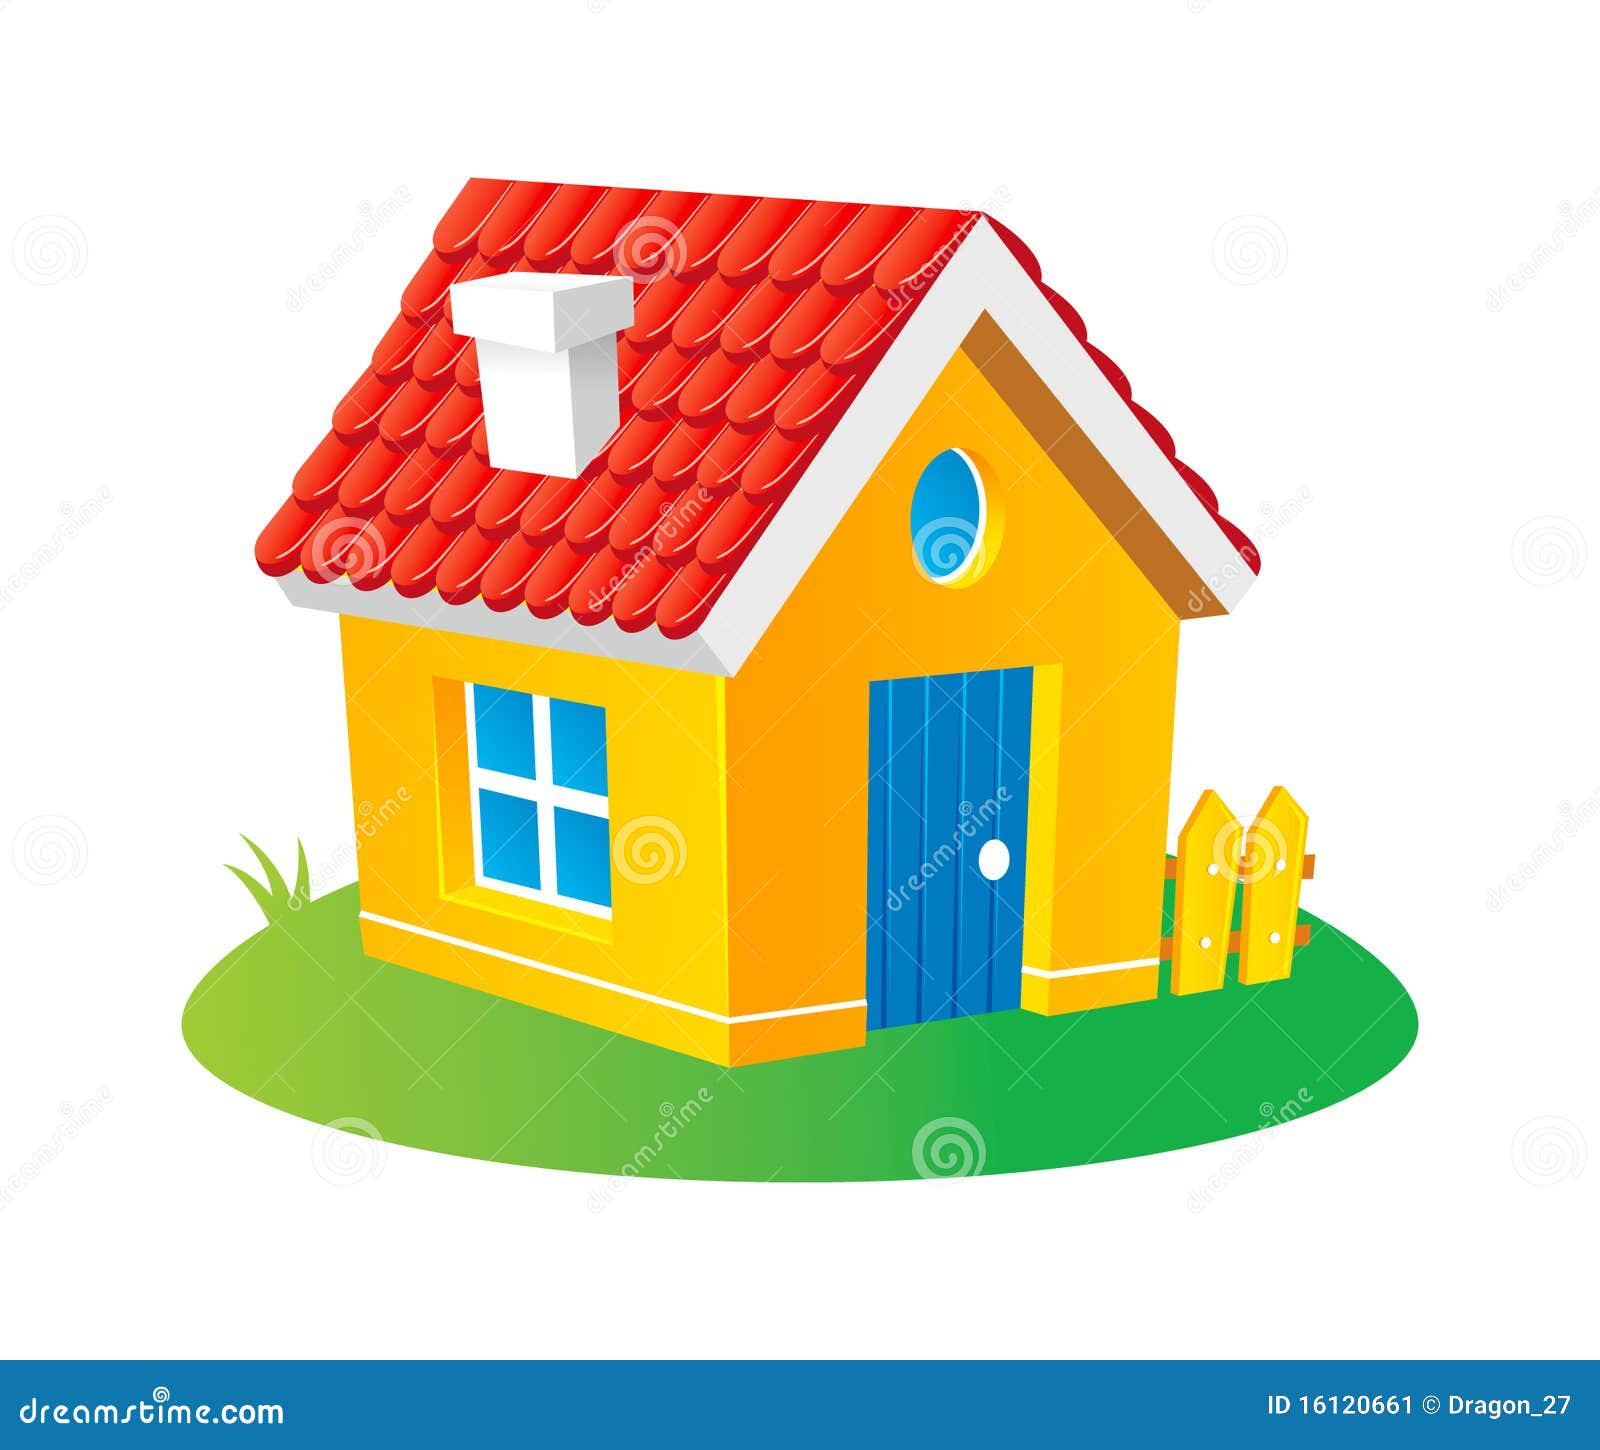 house industries clipart - photo #43